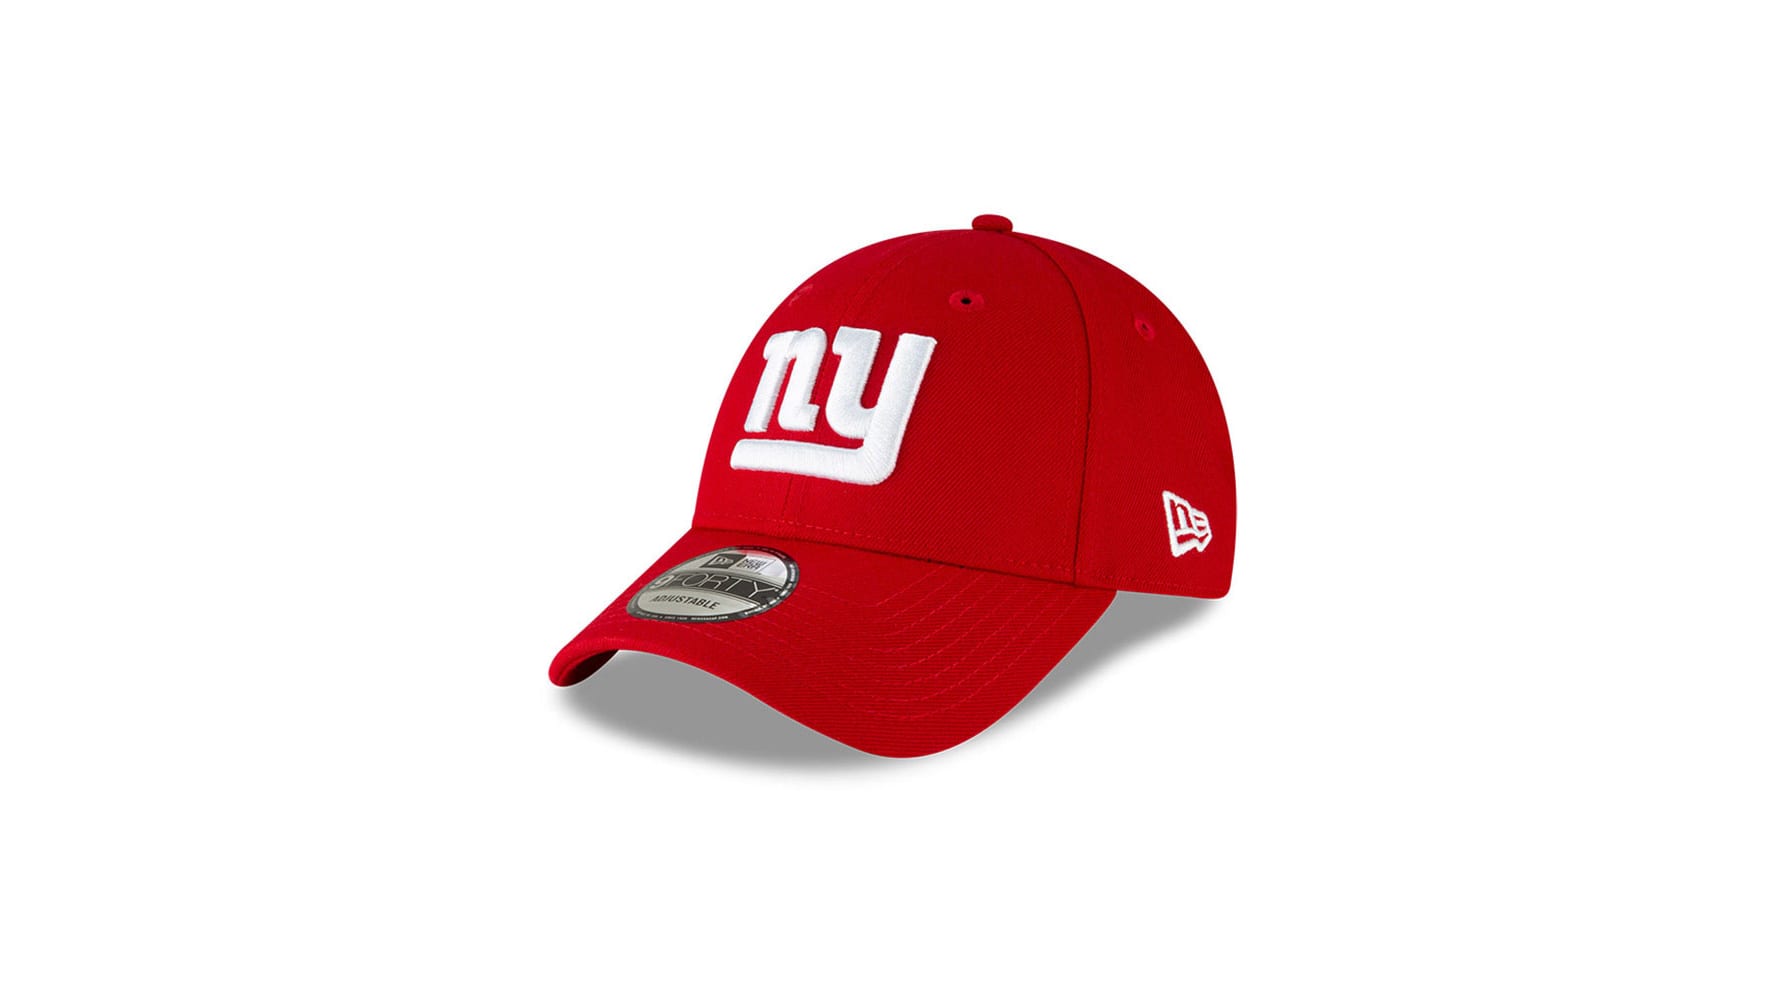 NY Giants 2T XL-LOGO SNAPBACK 2 Navy-Red Adjustable Hat by Mitche